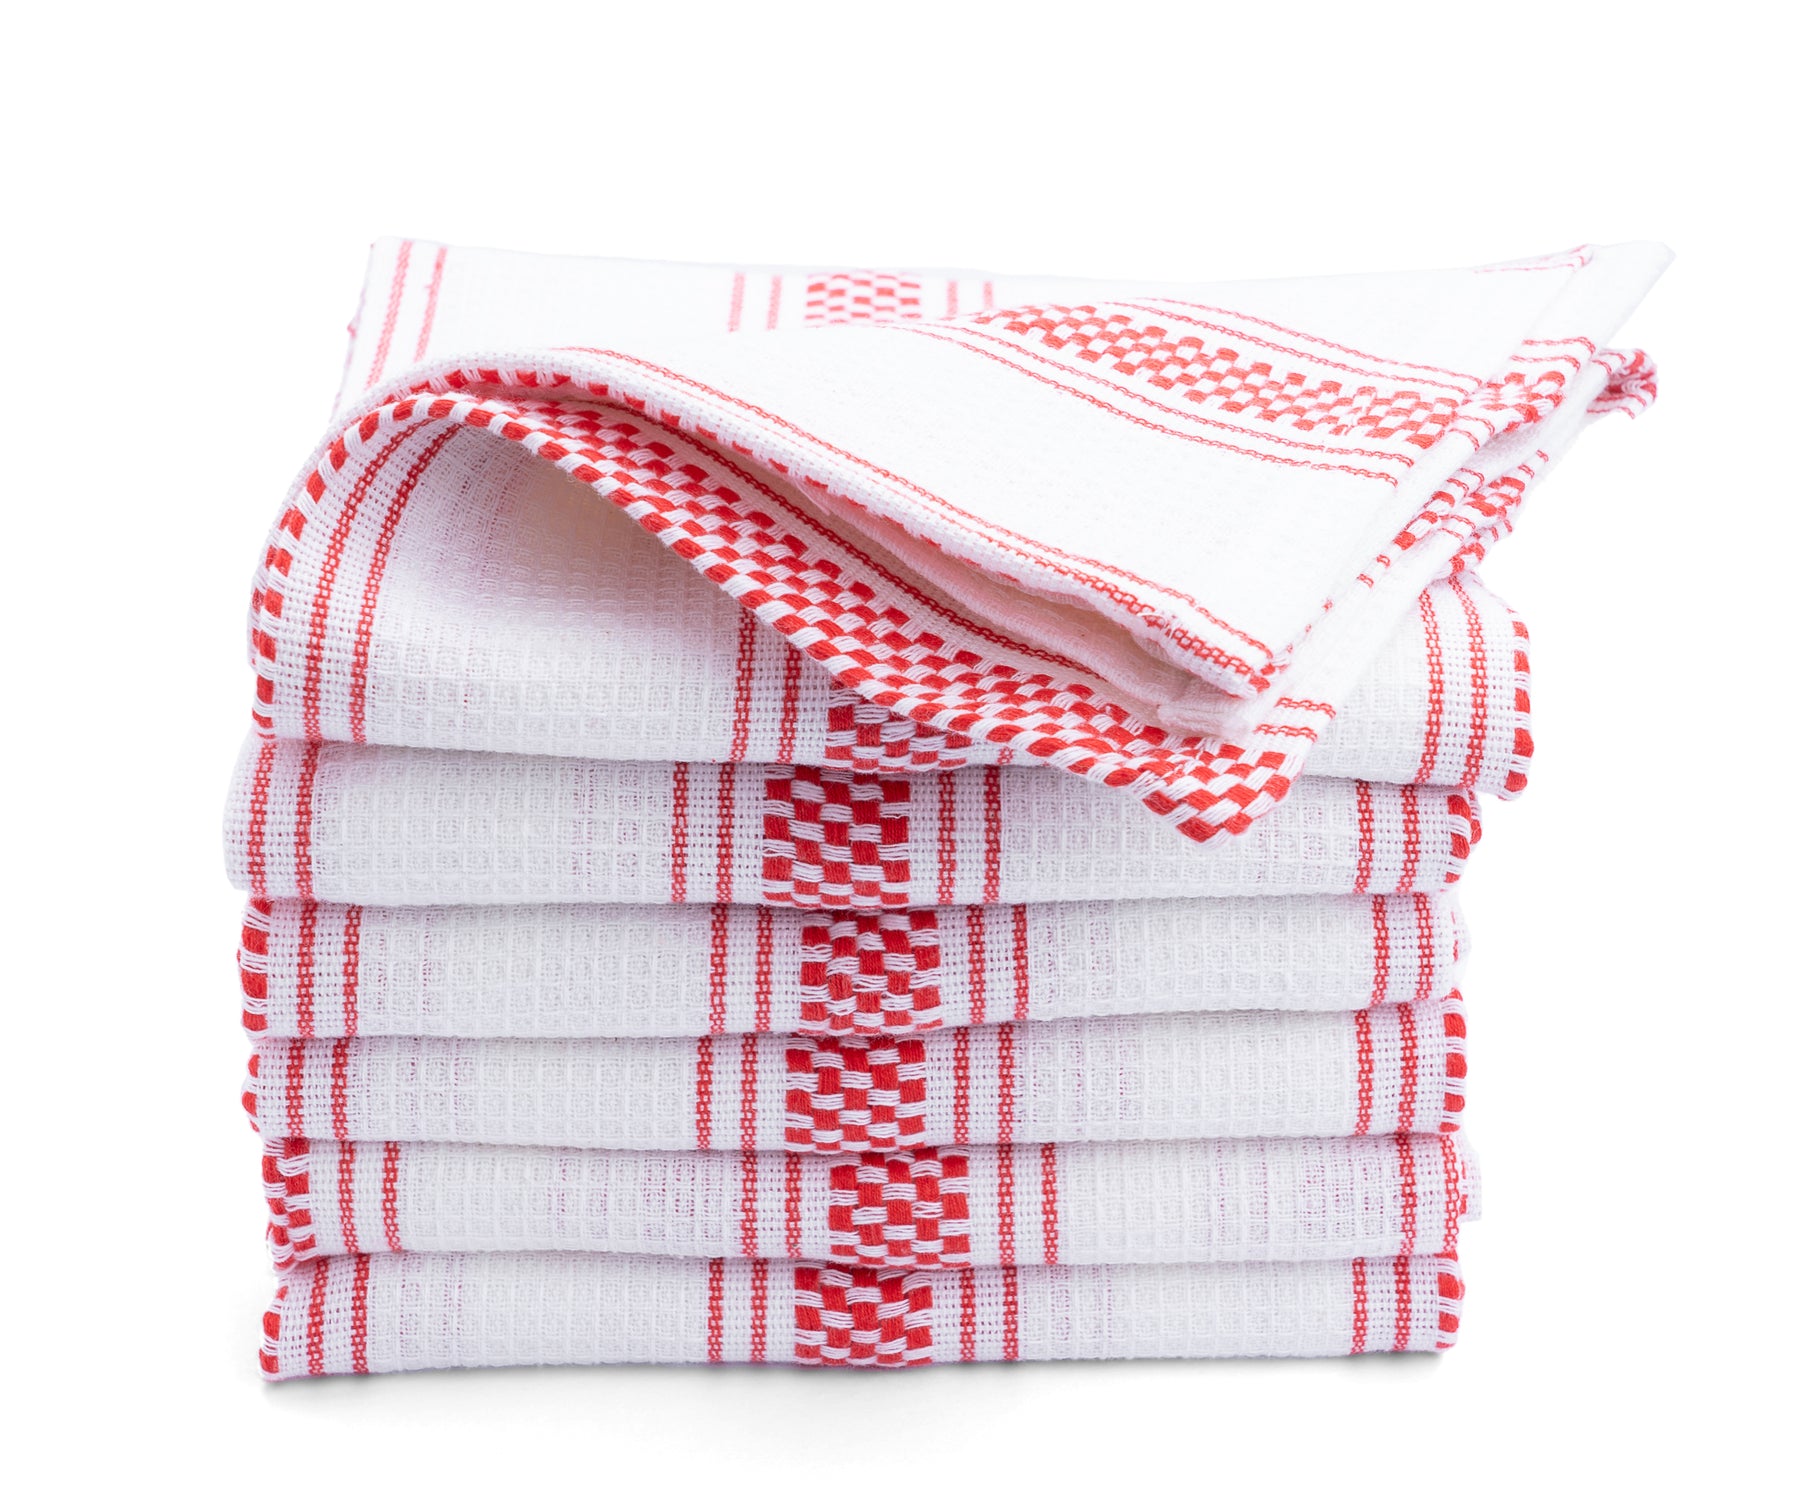 kitchen towel dish towels for drying dishes tea towel kitchen towel sets striped kitchen towels waffle dish towels for kitchen farmhouse decor kitchen striped kitchen towels flour sack towels fall kitchen towels fall dish towels fall hand towels fall dish towels for kitchen thanksgiving kitchen towels